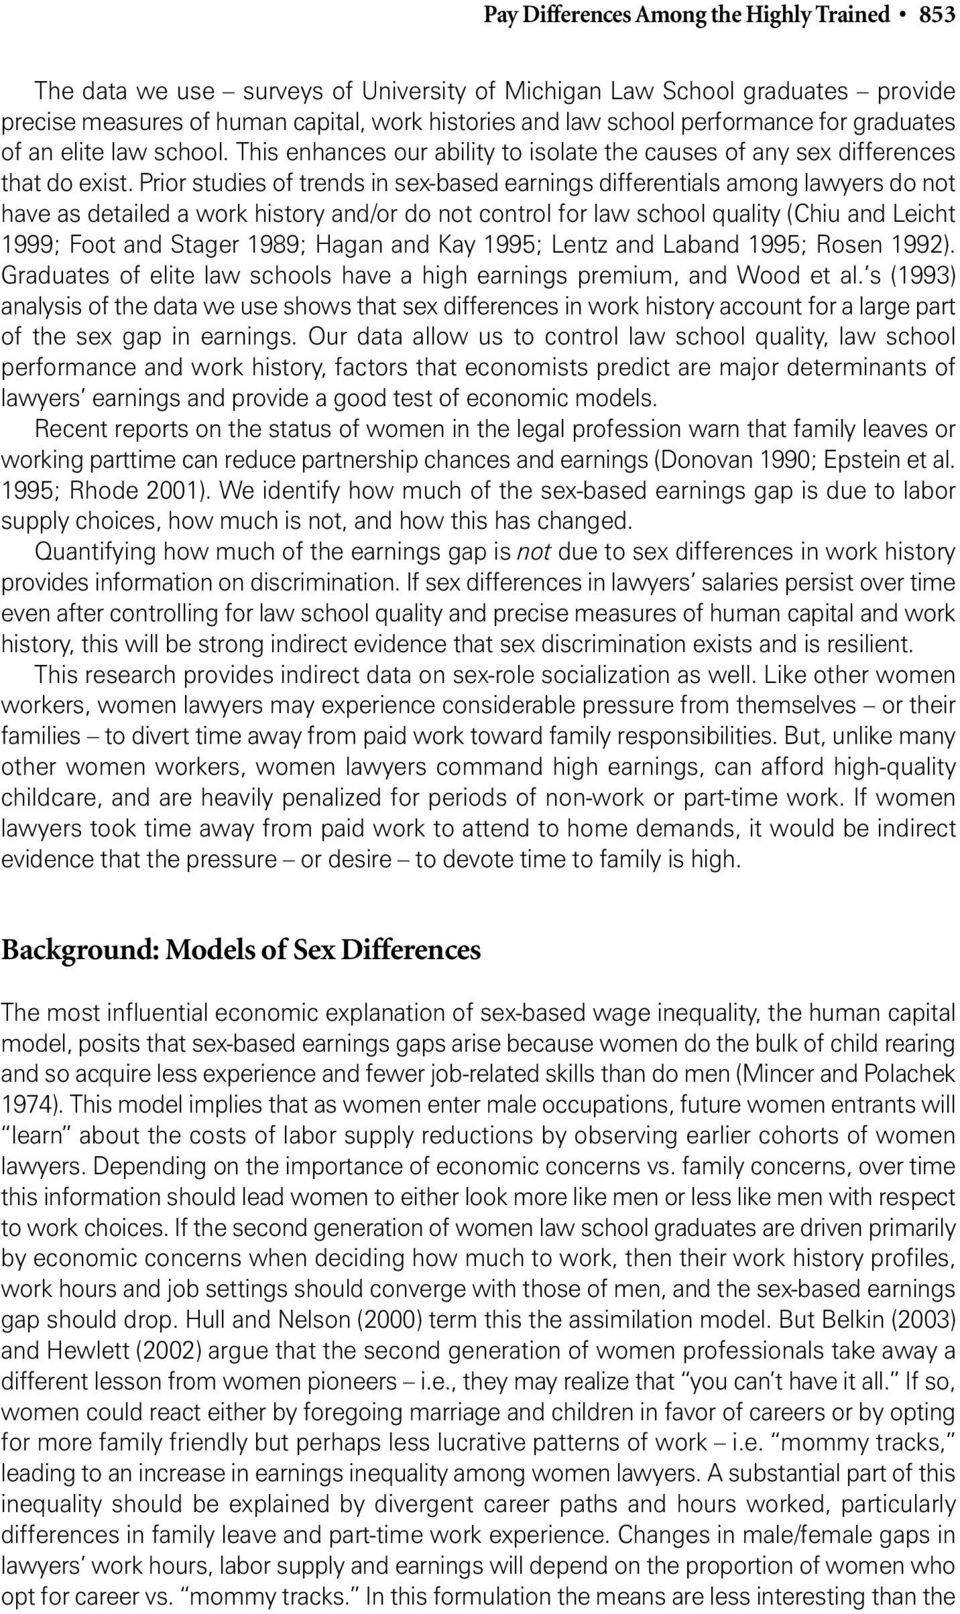 Prior studies of trends in sex-based earnings differentials among lawyers do not have as detailed a work history and/or do not control for law school quality (Chiu and Leicht 1999; Foot and Stager